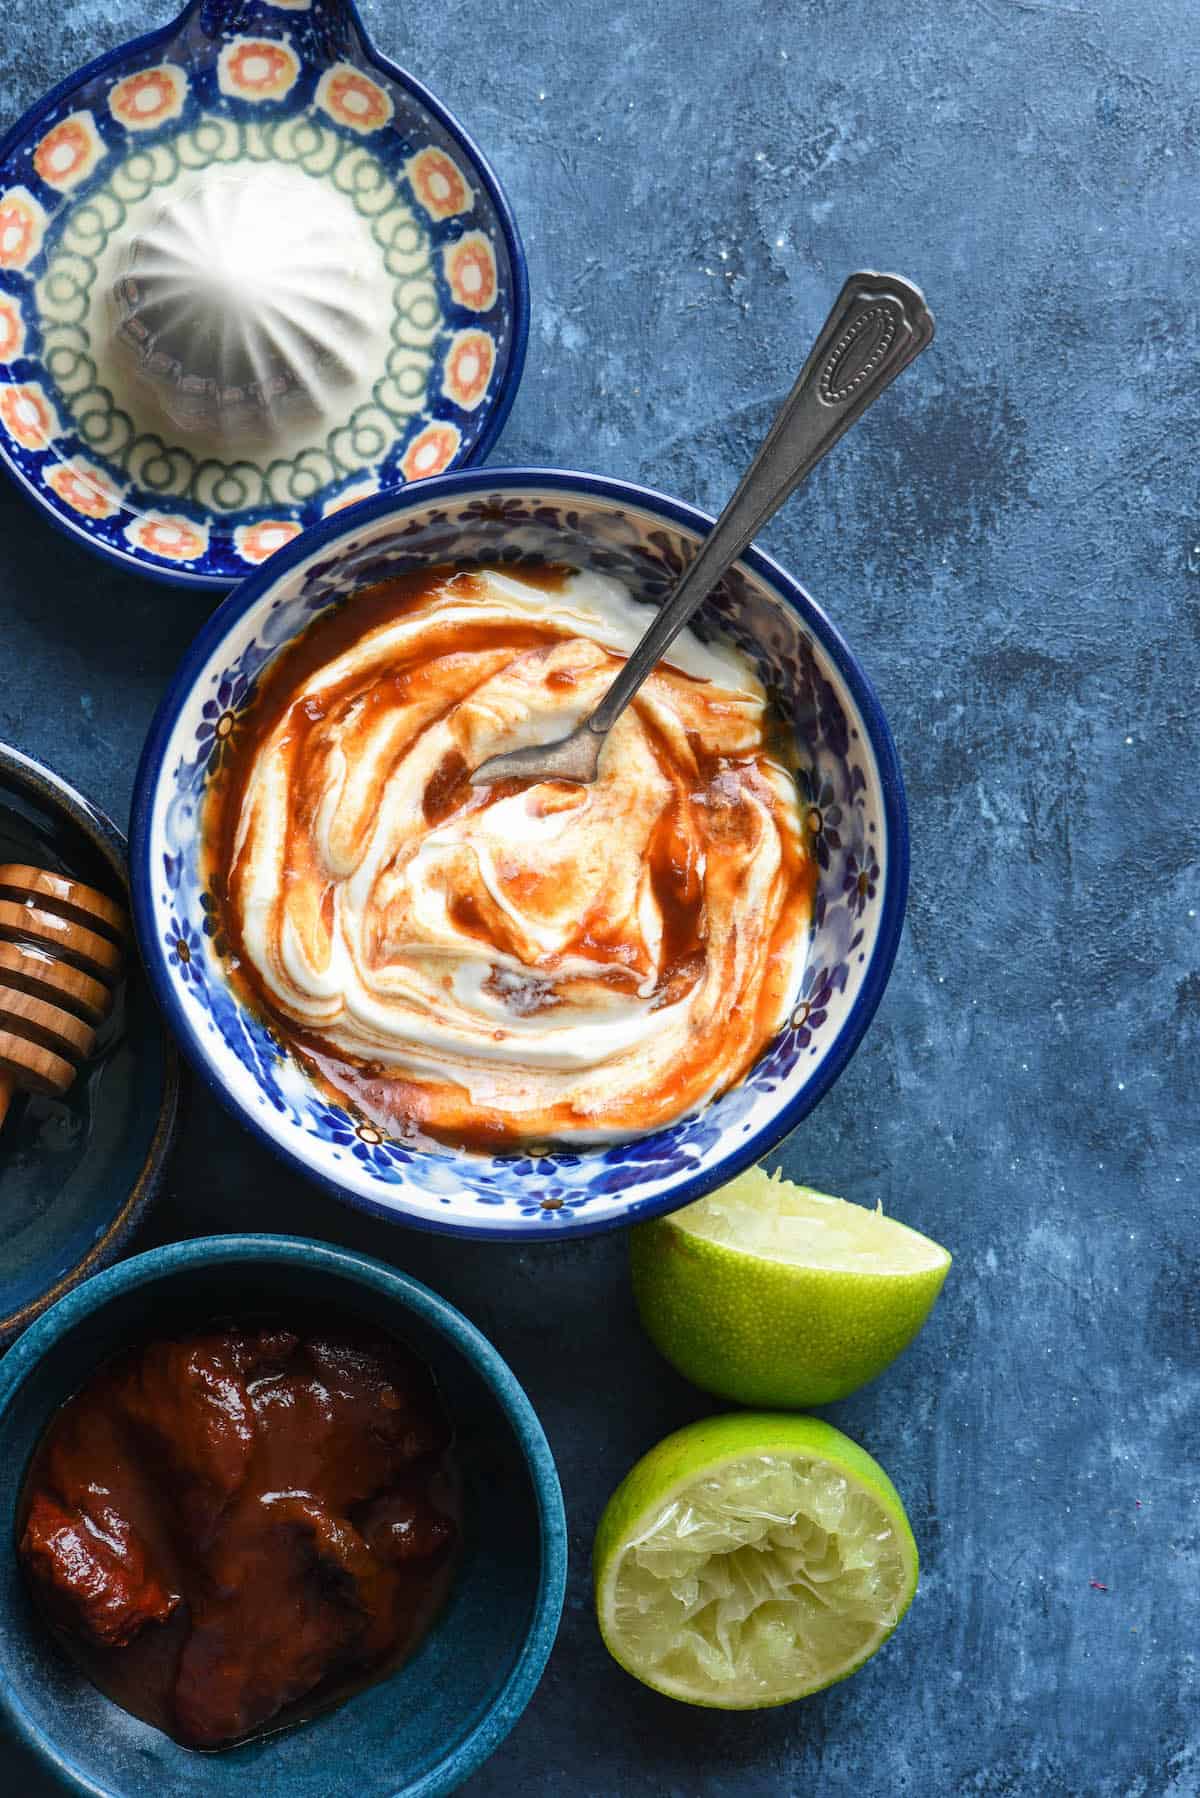 Bowl of creamy chipotle sauce on blue background with chipotles and limes alongside.